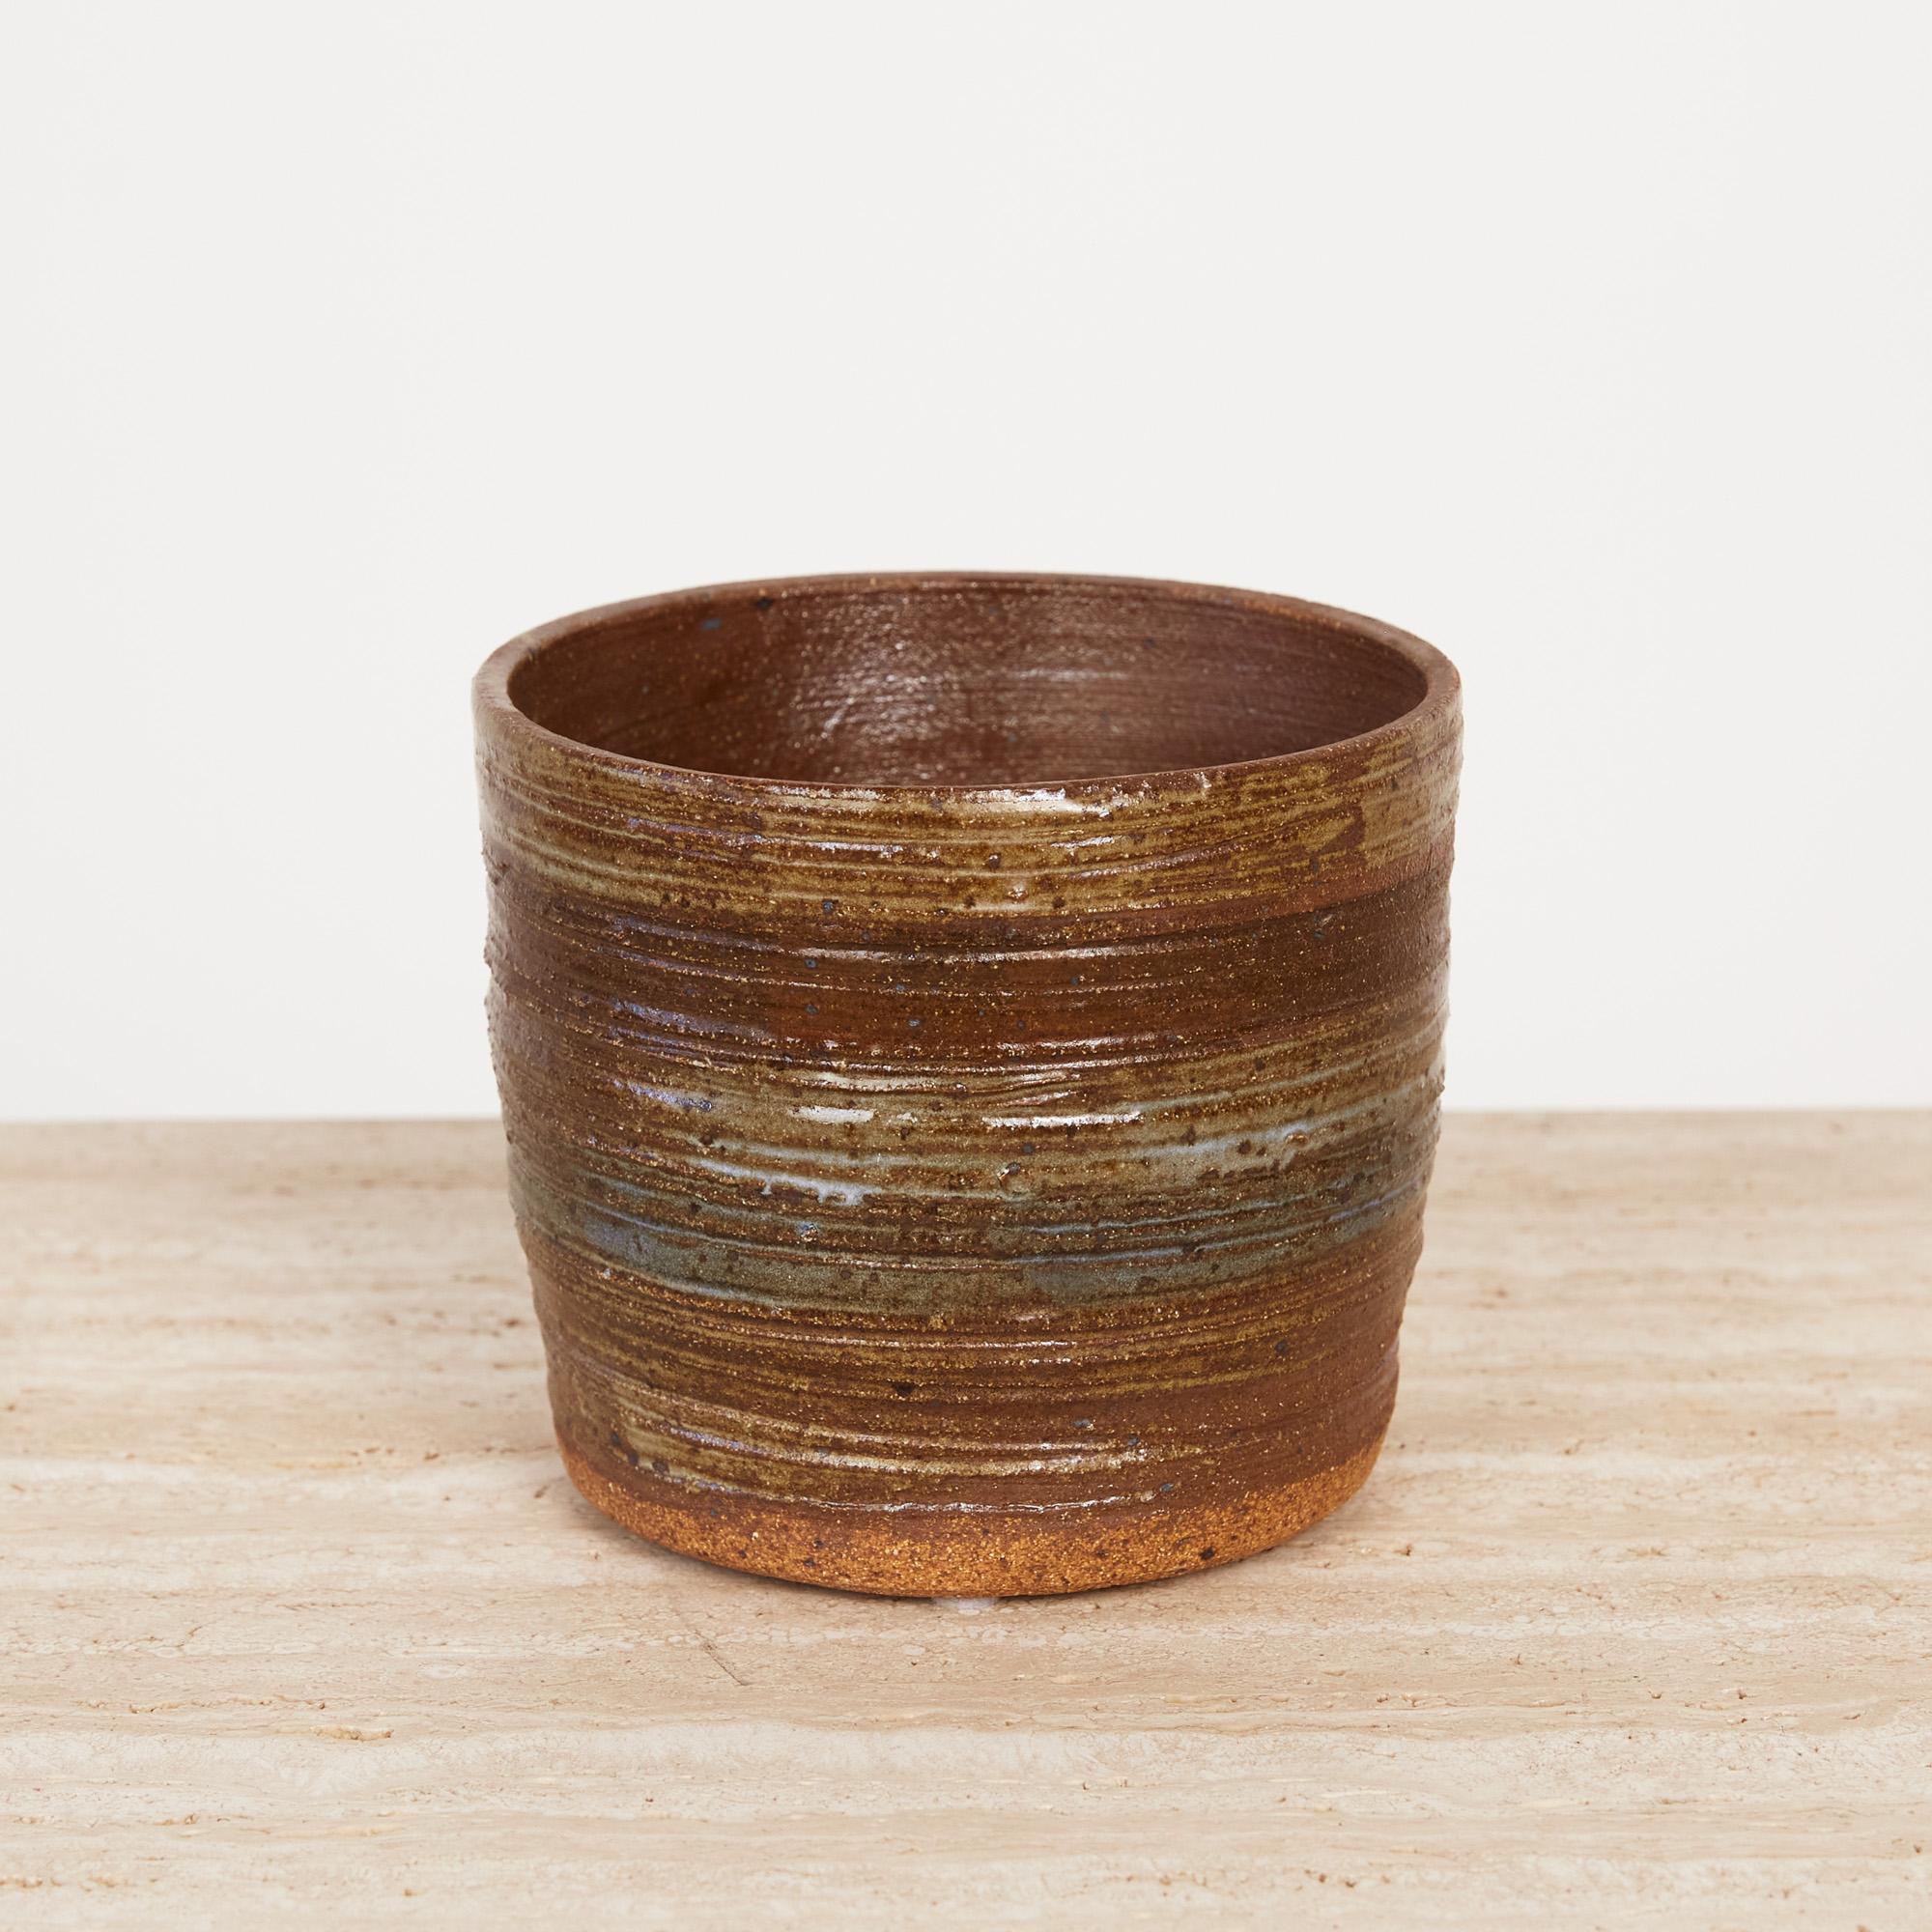 Glazed Ceramic Vessel with Incised Striated Pattern